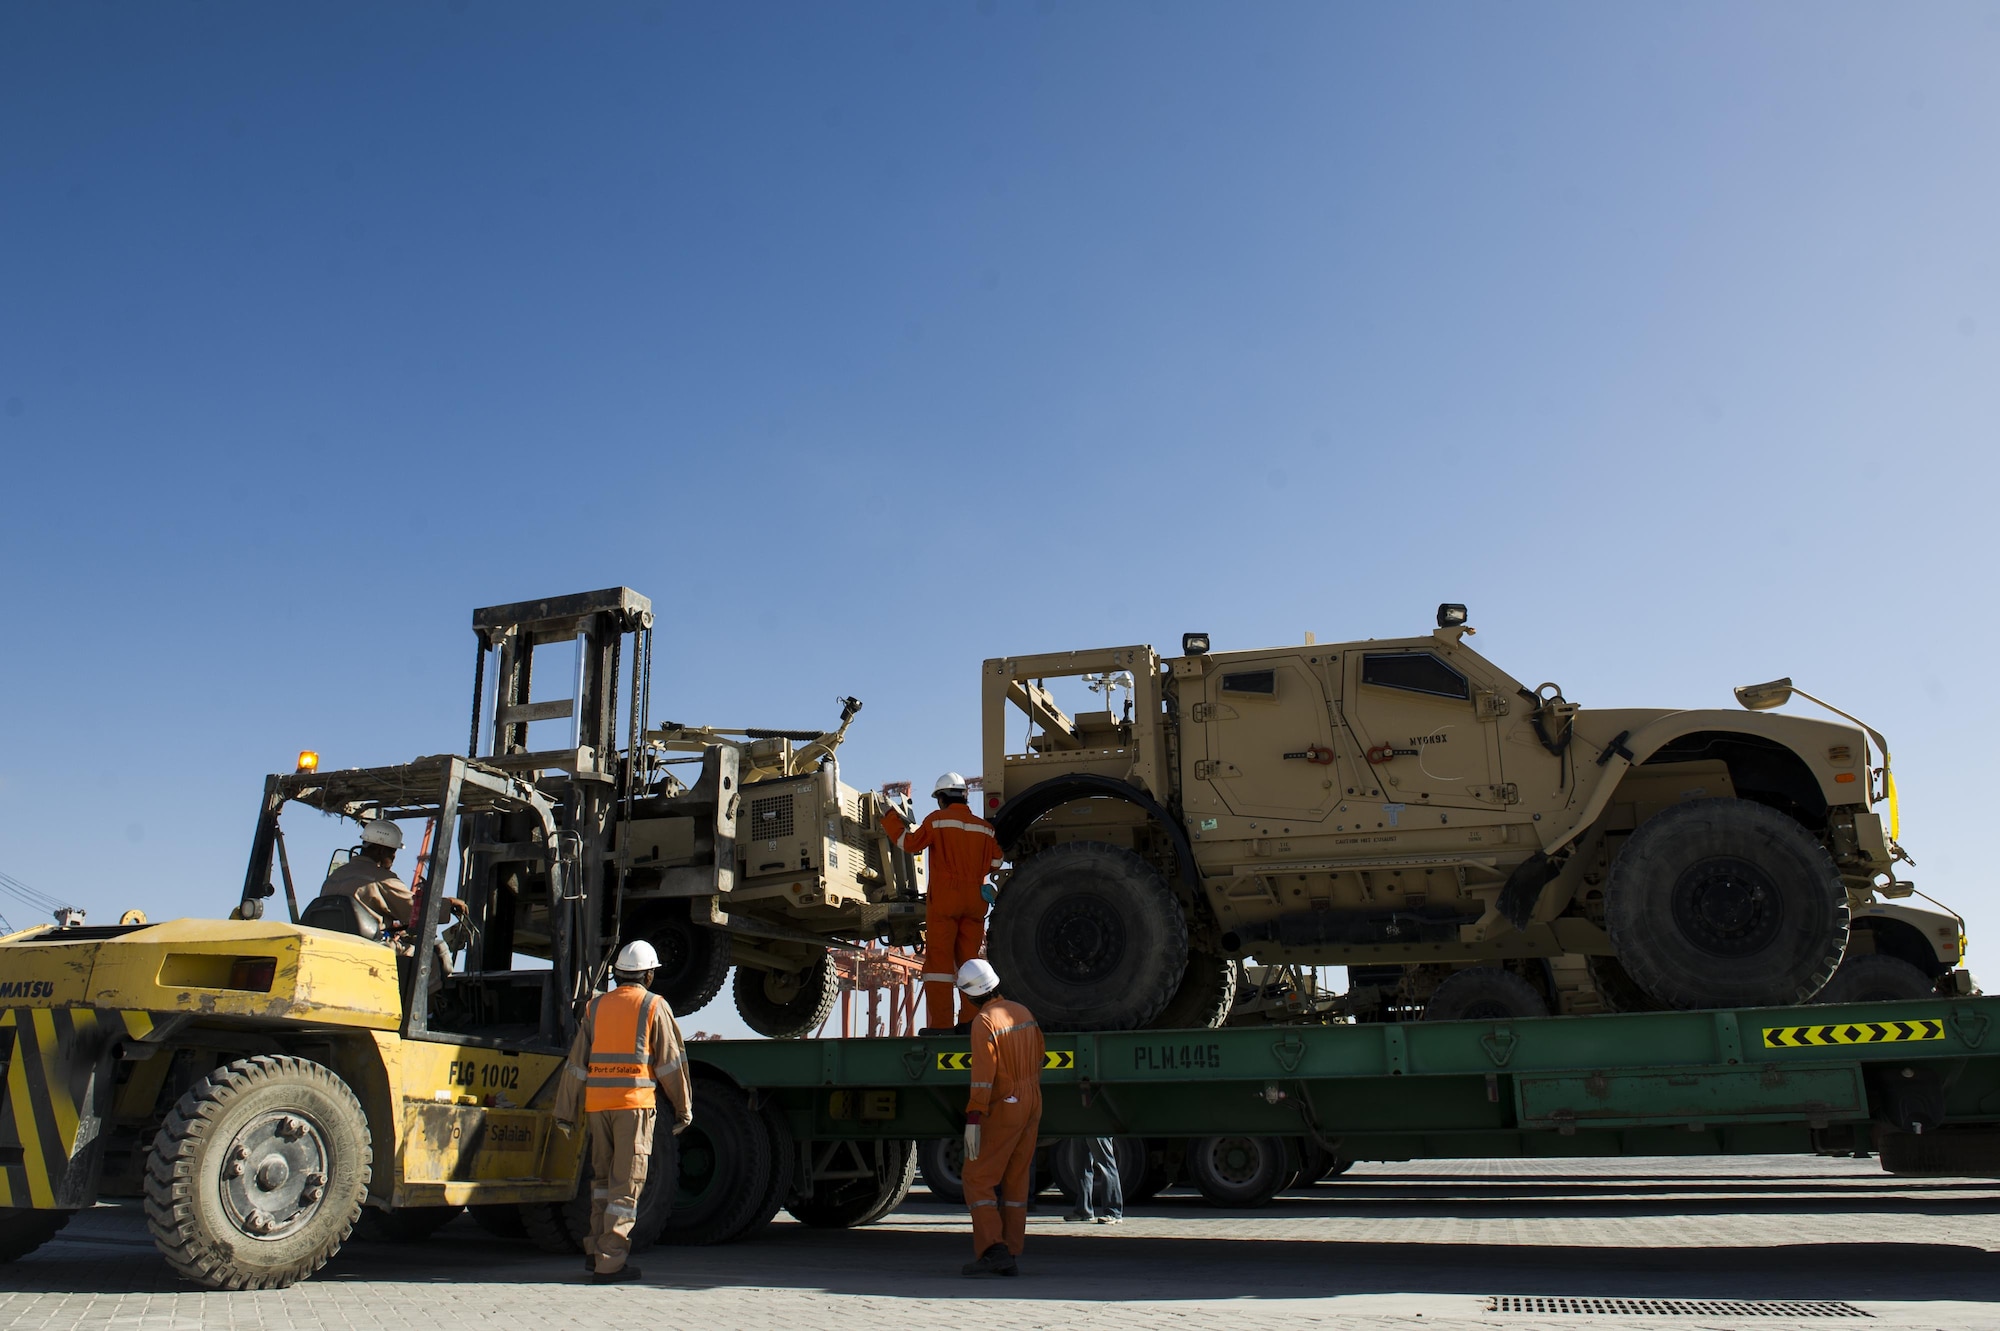 Contractors with the 405th Air Expeditionary Group unload a Mine Resistant Ambush-Protected vehicle from a flatbed trailer at the sea port at an undisclosed location in Southwest Asia, Dec. 31, 2013. The 405th AEG supports U.S. Central Command's Deployment and Distribution Operation Center, a strategically located air, land and sea logistics hub, playing a critical role in the U.S. departure from Afghanistan. (U.S. Air Force photo by Staff Sgt. Stephany Richards) 
